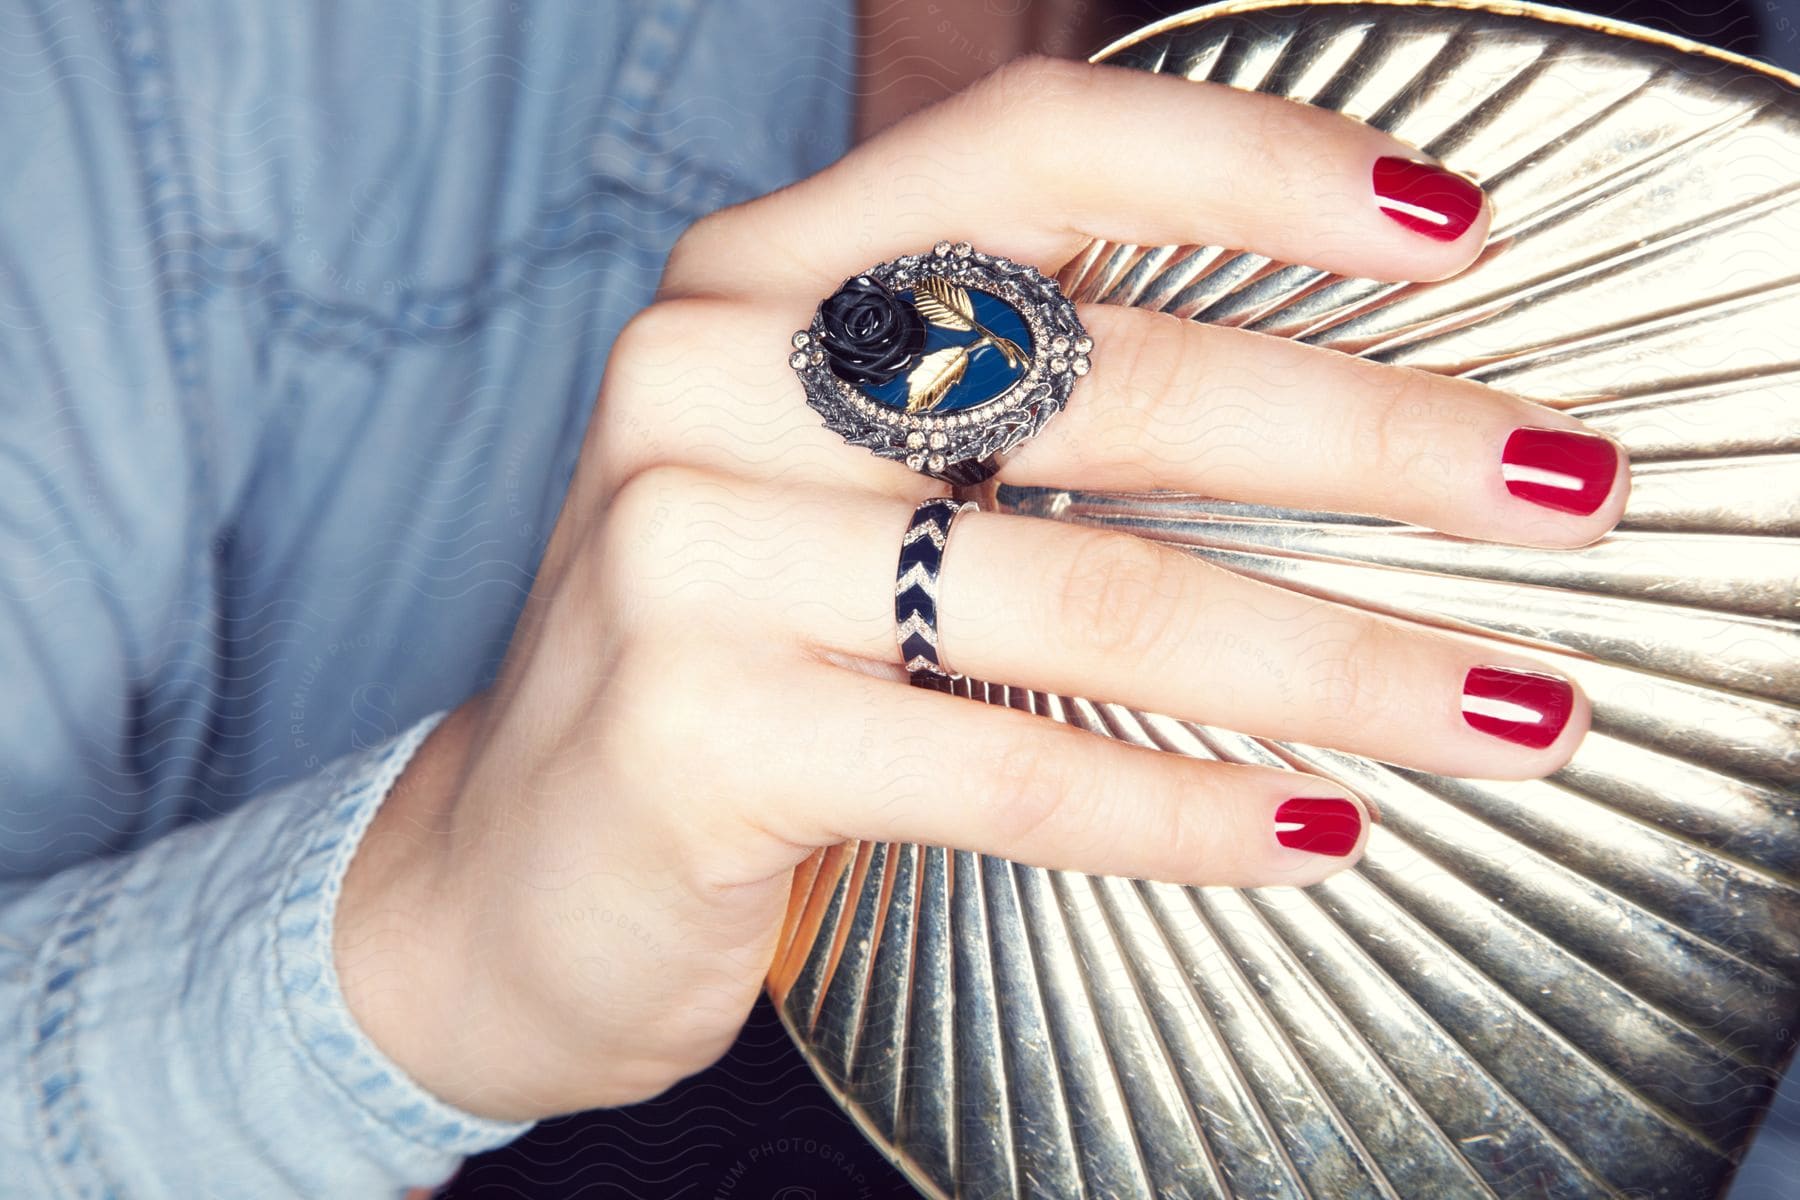 A womans hand with painted nails and ornate ring holding a metal purse